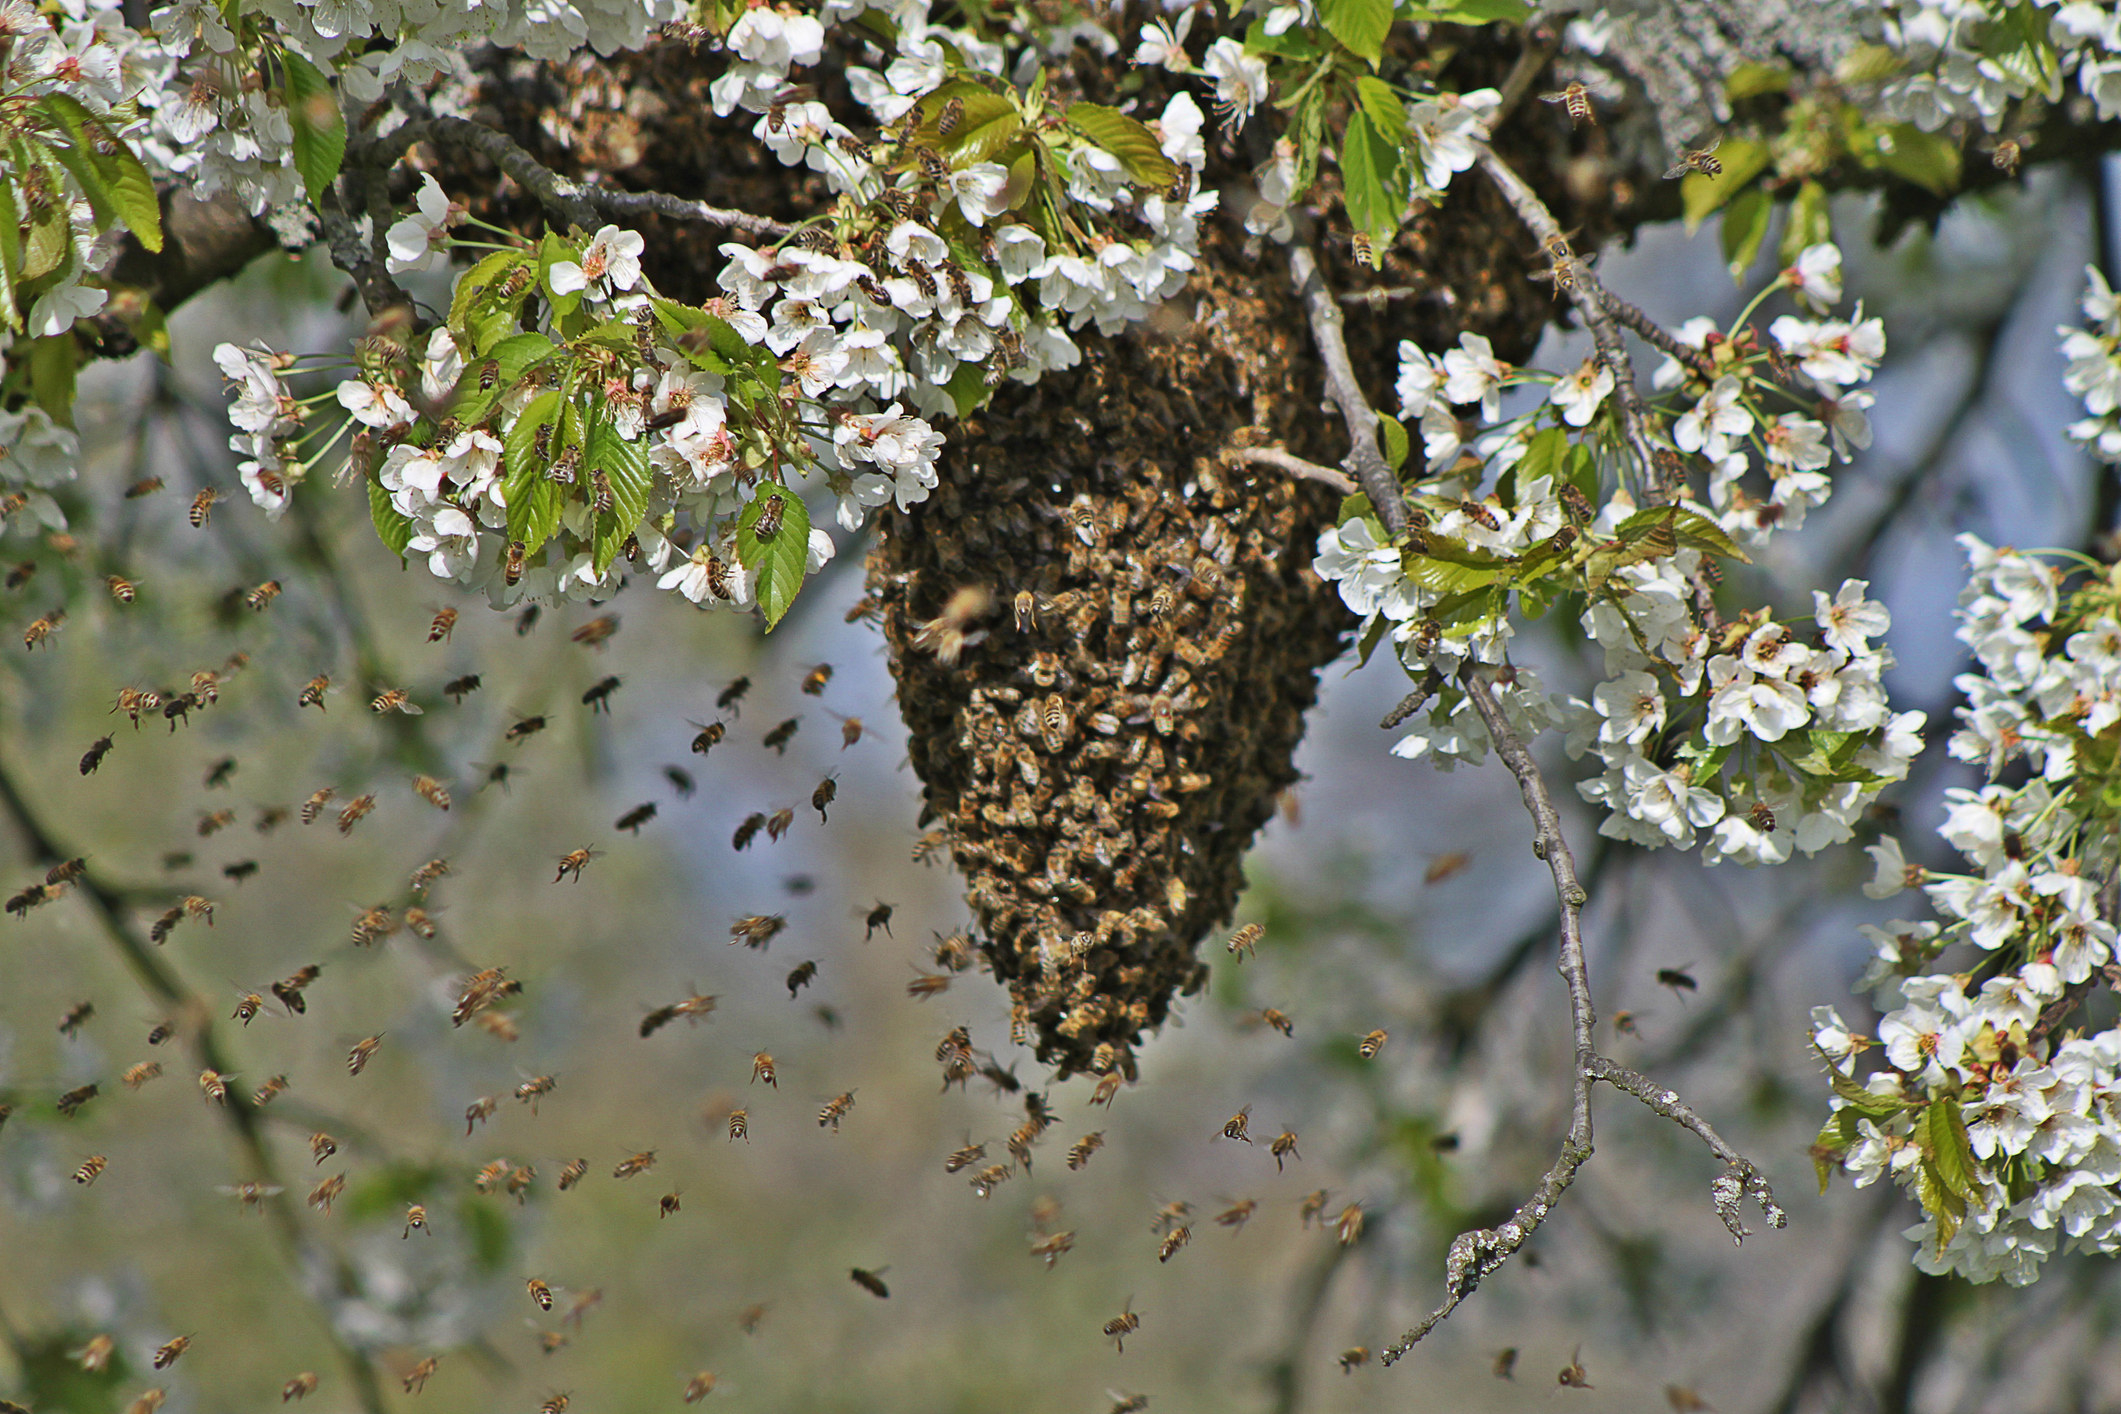 A beehive on a tree